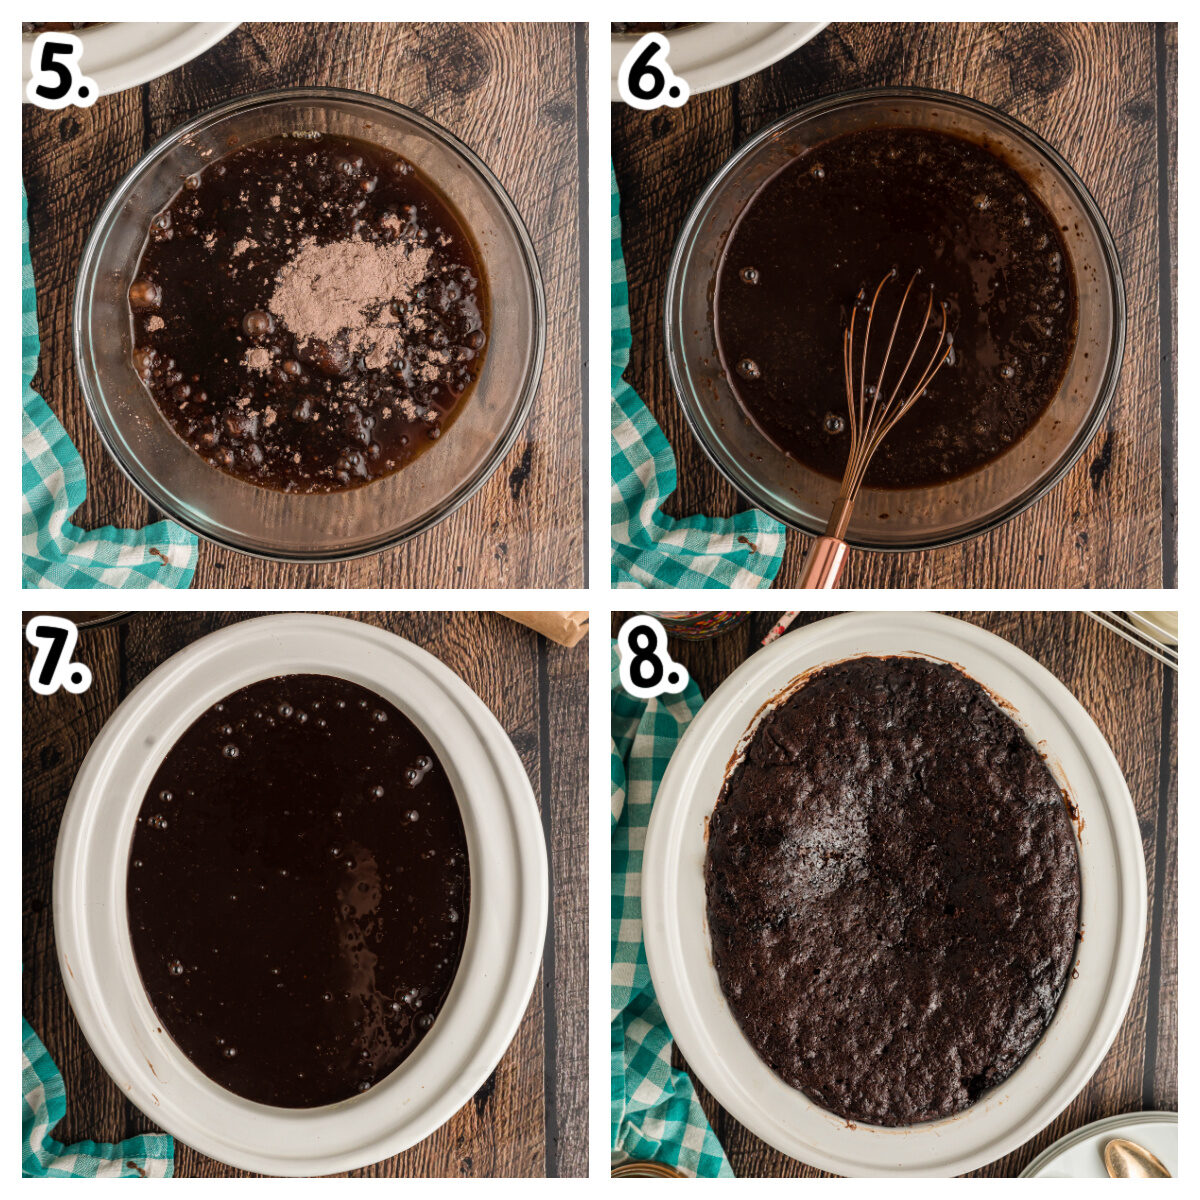 4 images showing hot to make pudding mix and cook hot fudge cake in slow cooker.